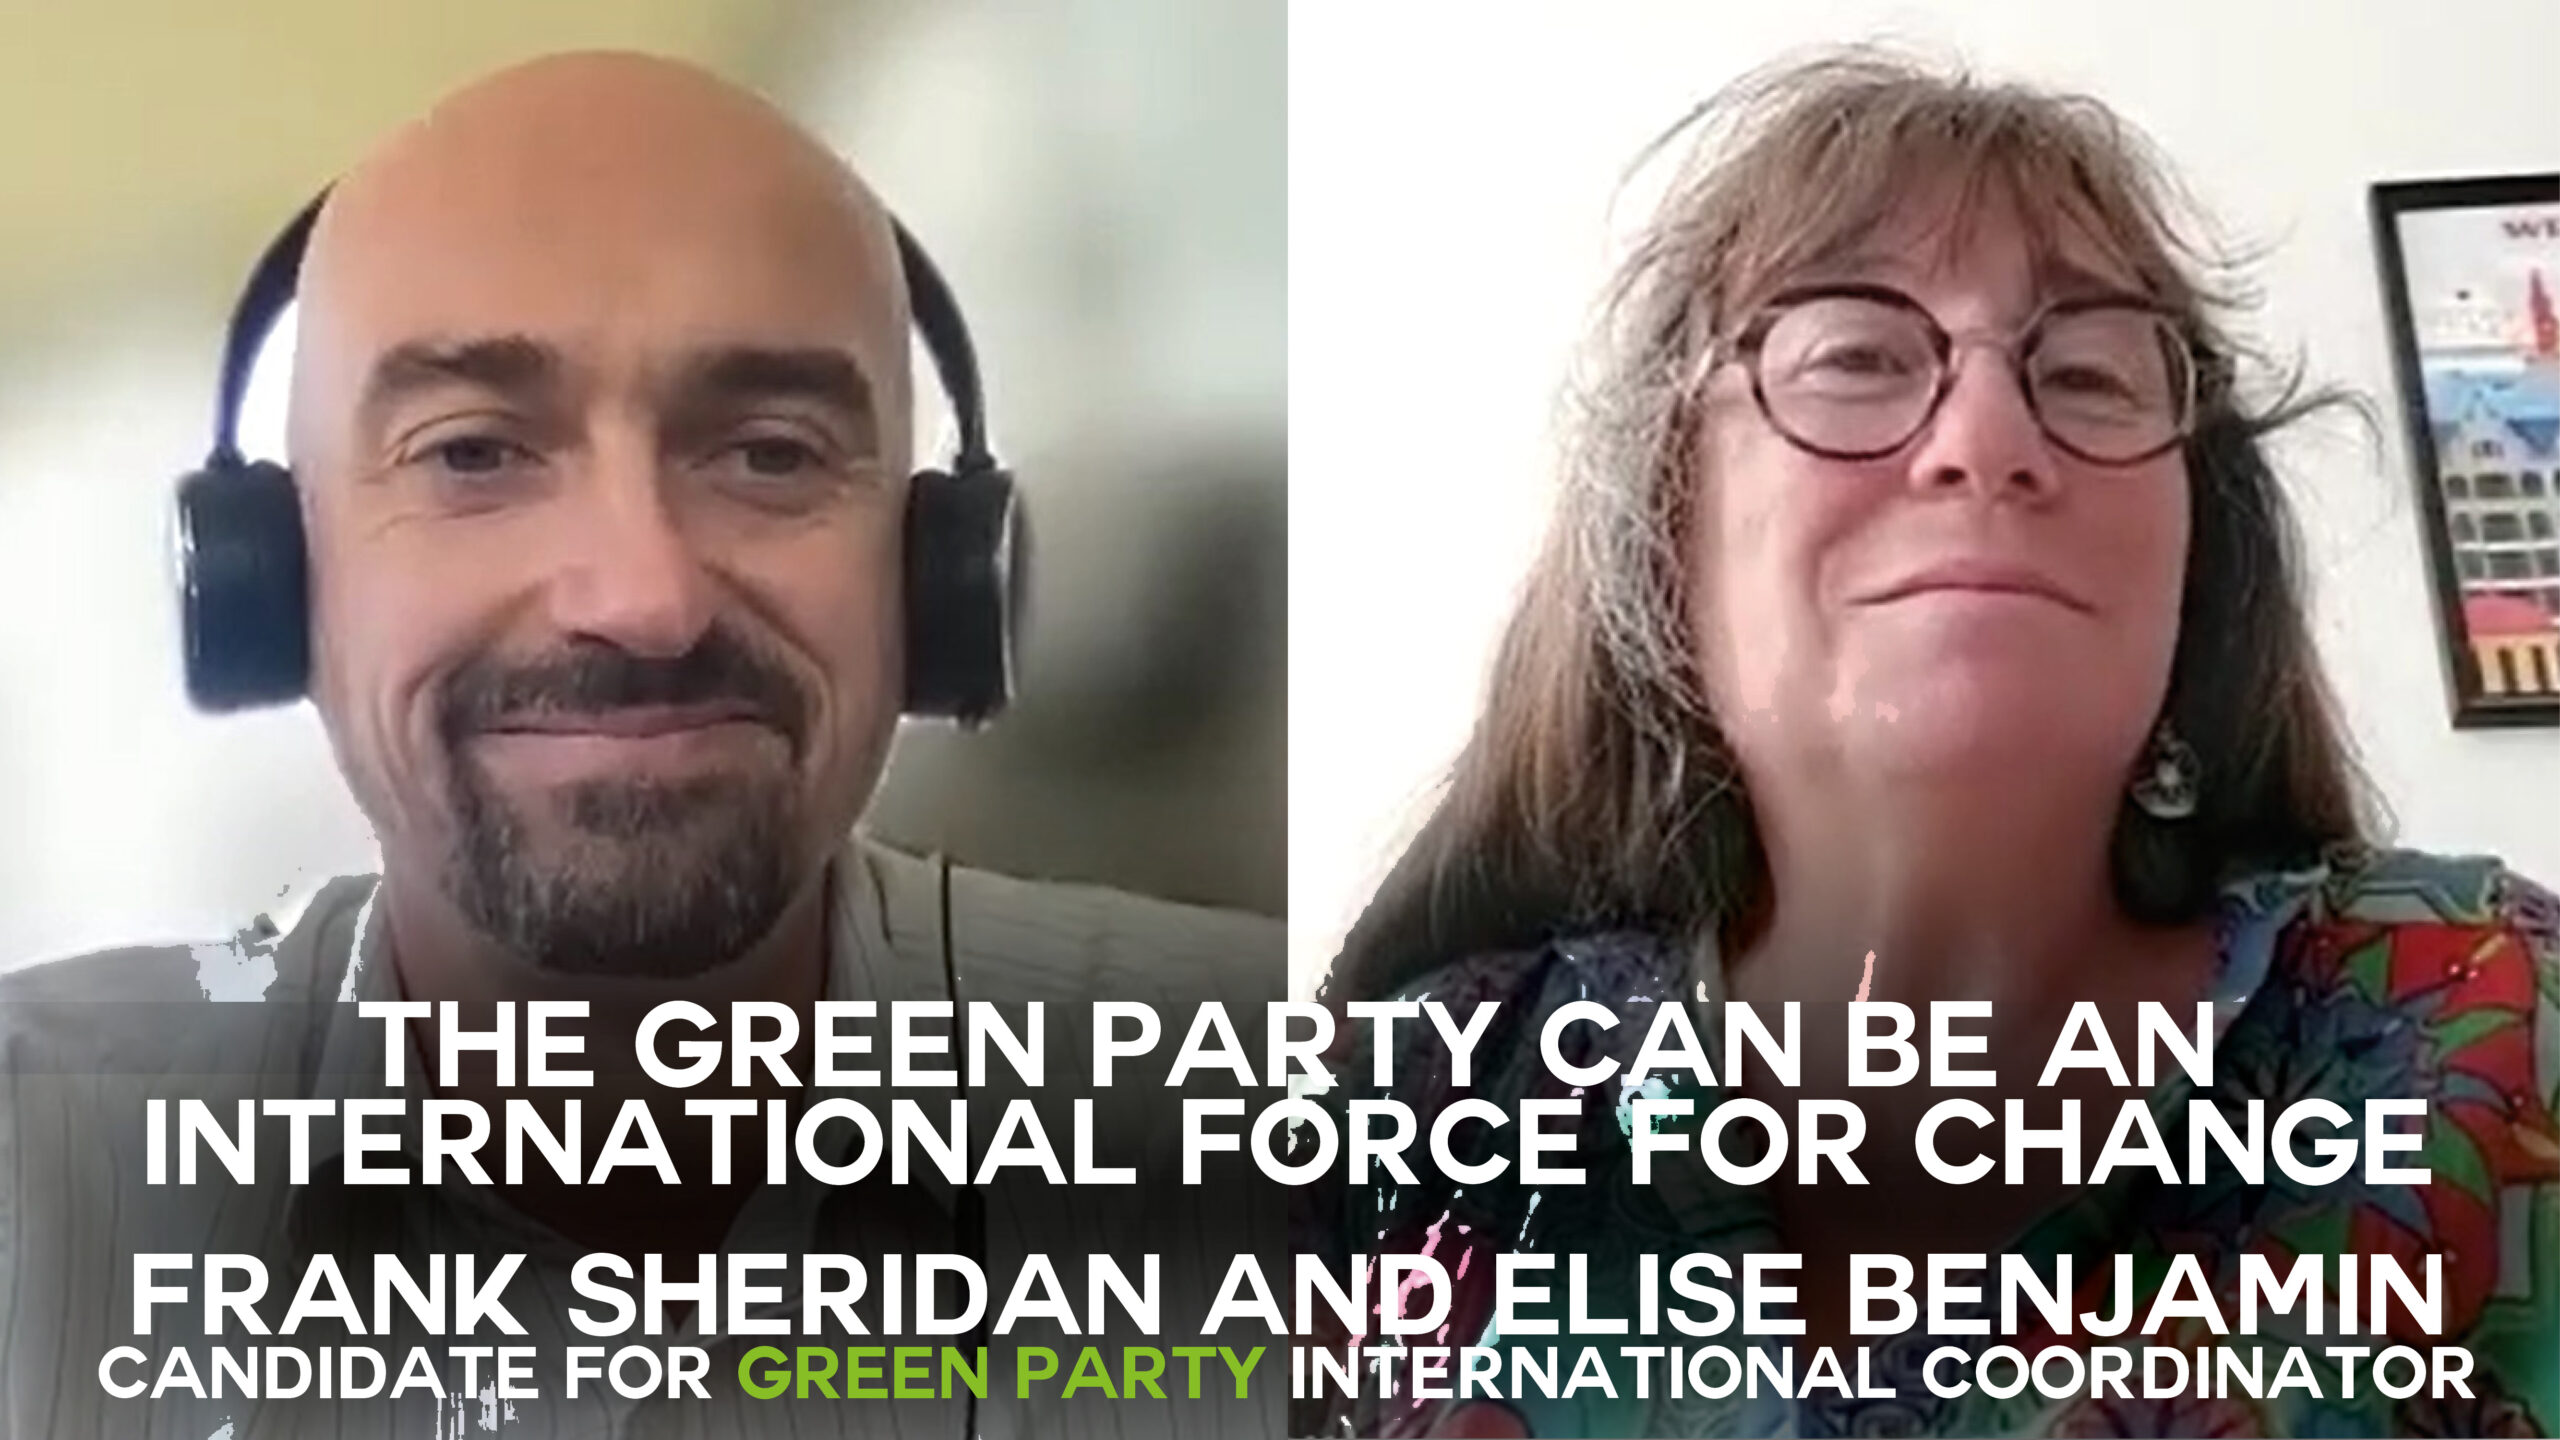 The Green Party can be an international force for change – Interview with Frank Sheridan & Elise Benjamin